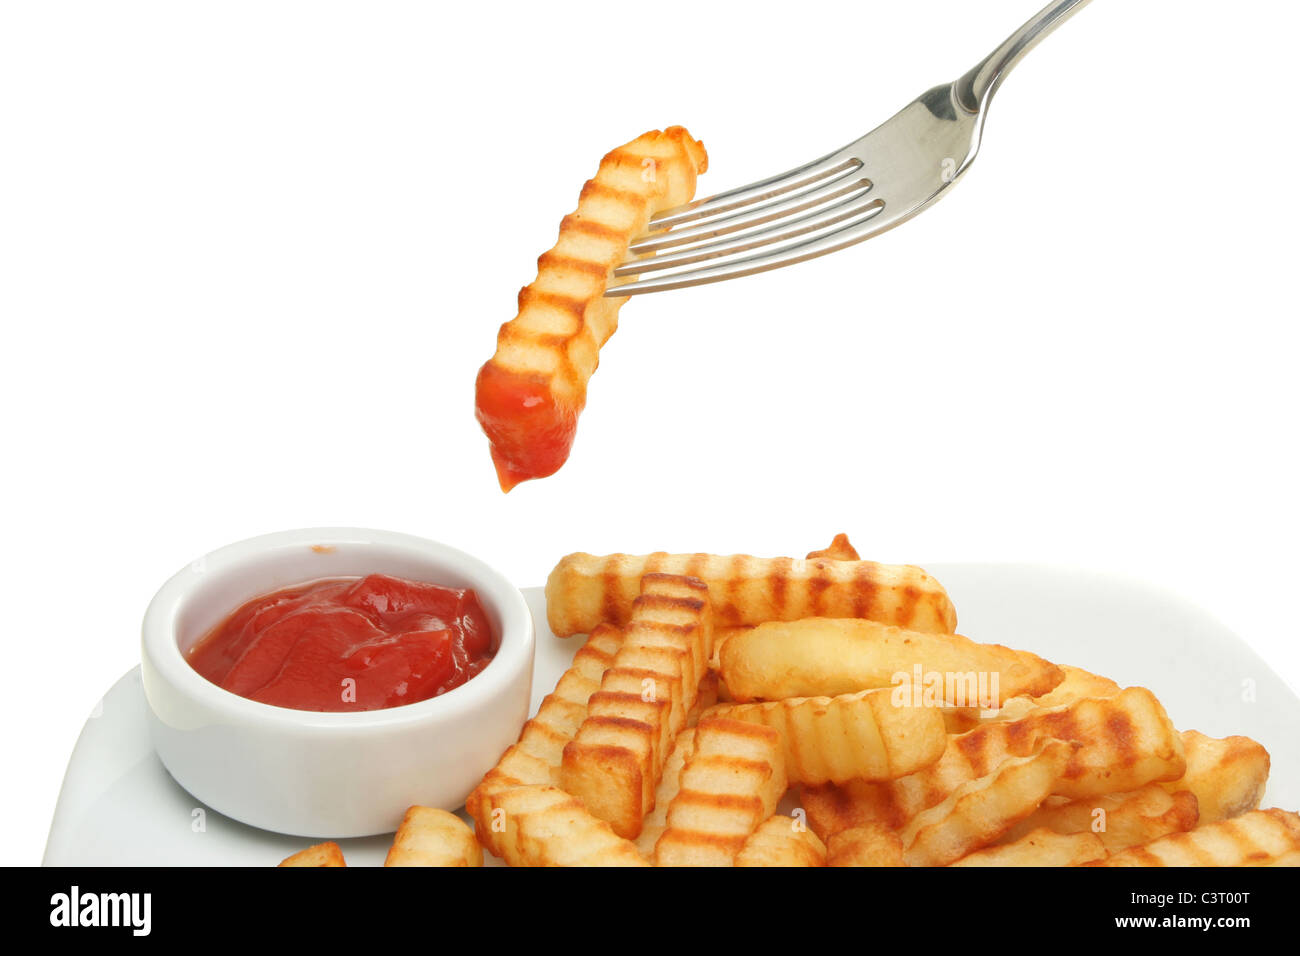 Crinkle cut potato chips and tomato ketchup with a chip dipped in ketchup on a fork Stock Photo